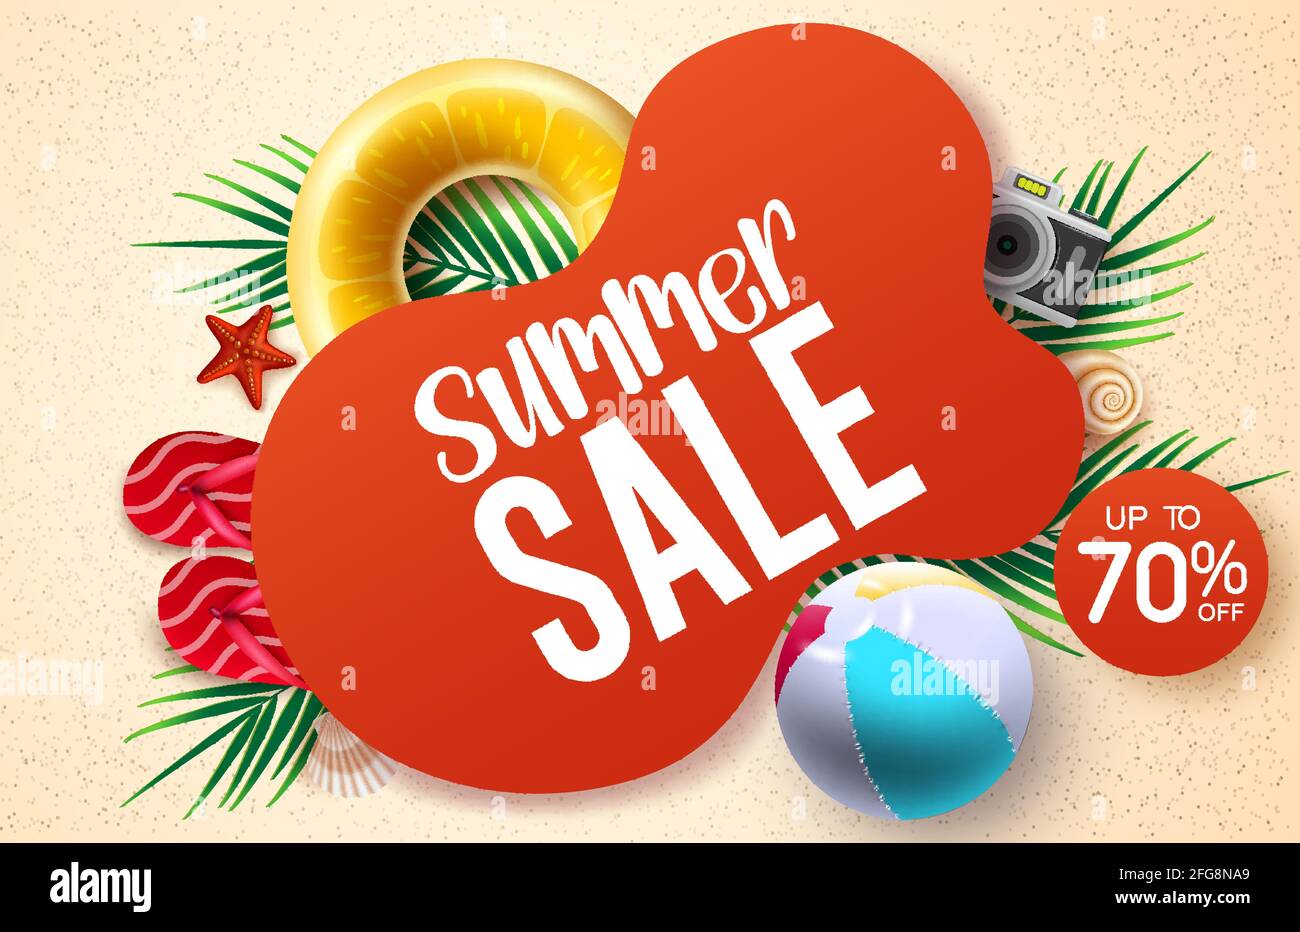 Summer sale vector banner design. Summer sale text with up to 70% off beach element like beach ball, floater and flipflop for tropical season business. Stock Vector